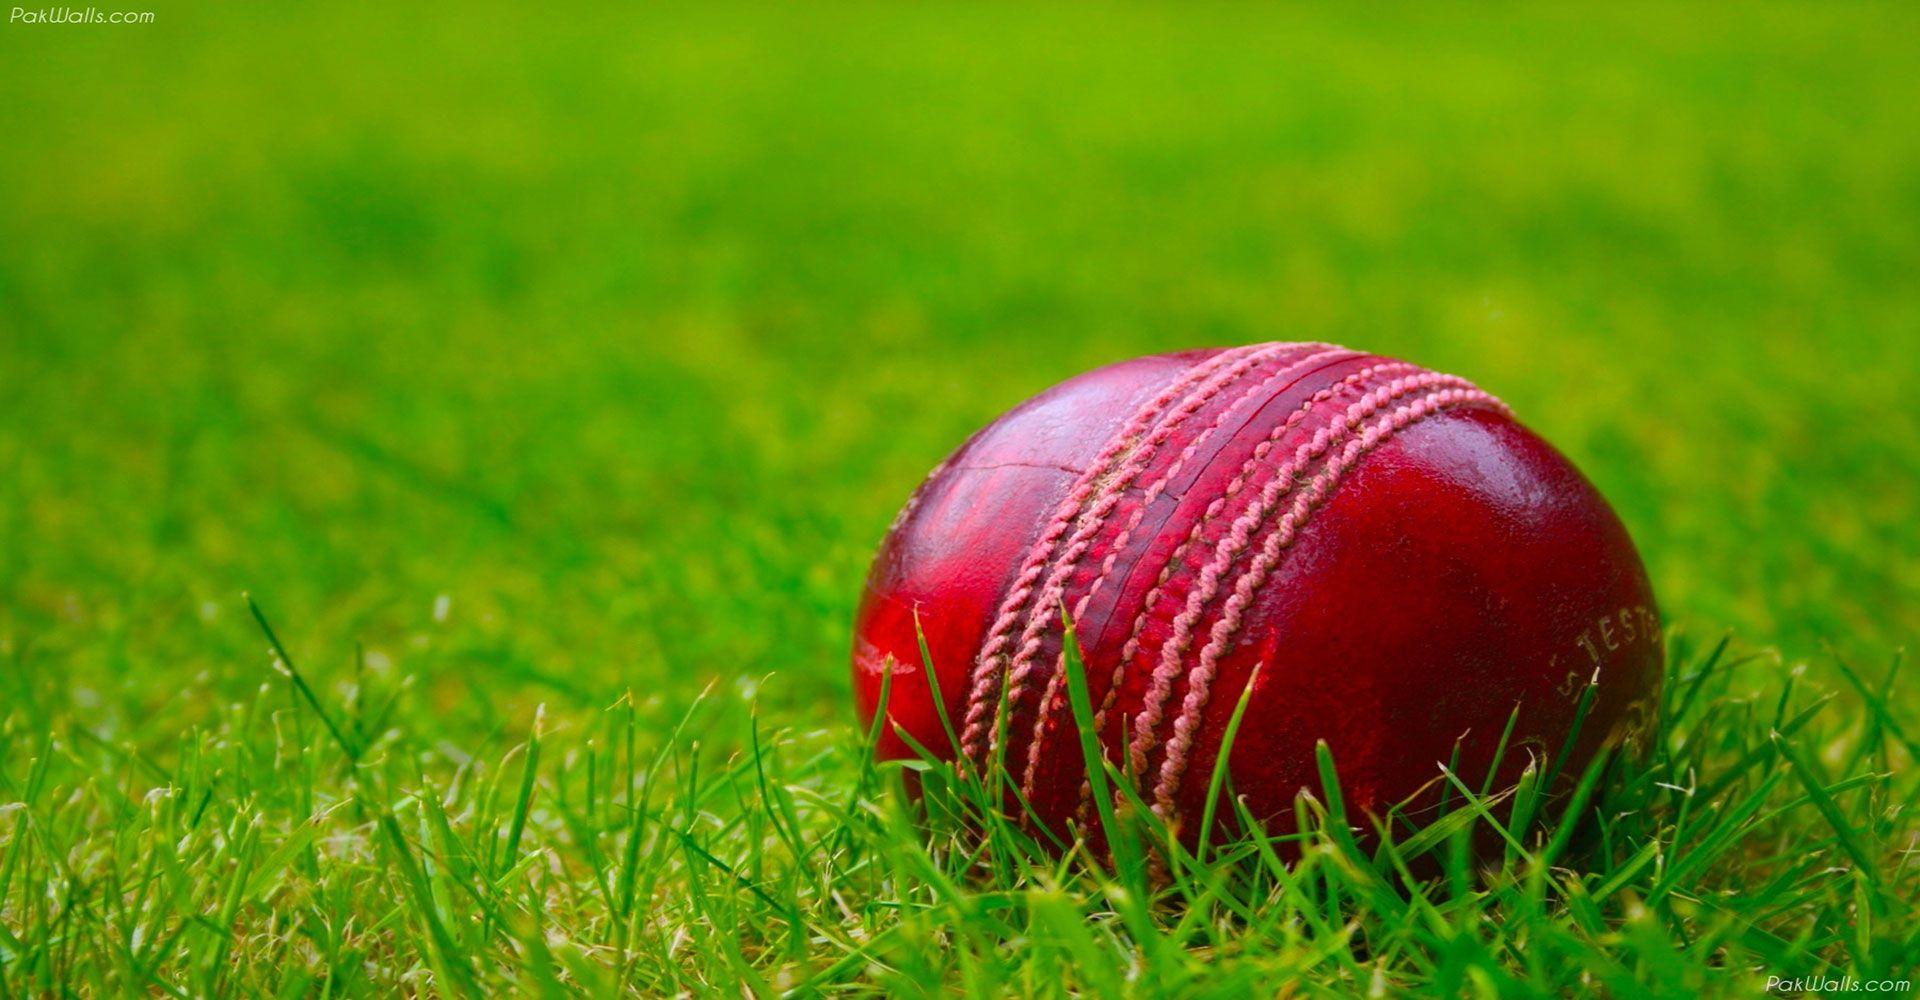 Cricket Wallpaper Contact Page